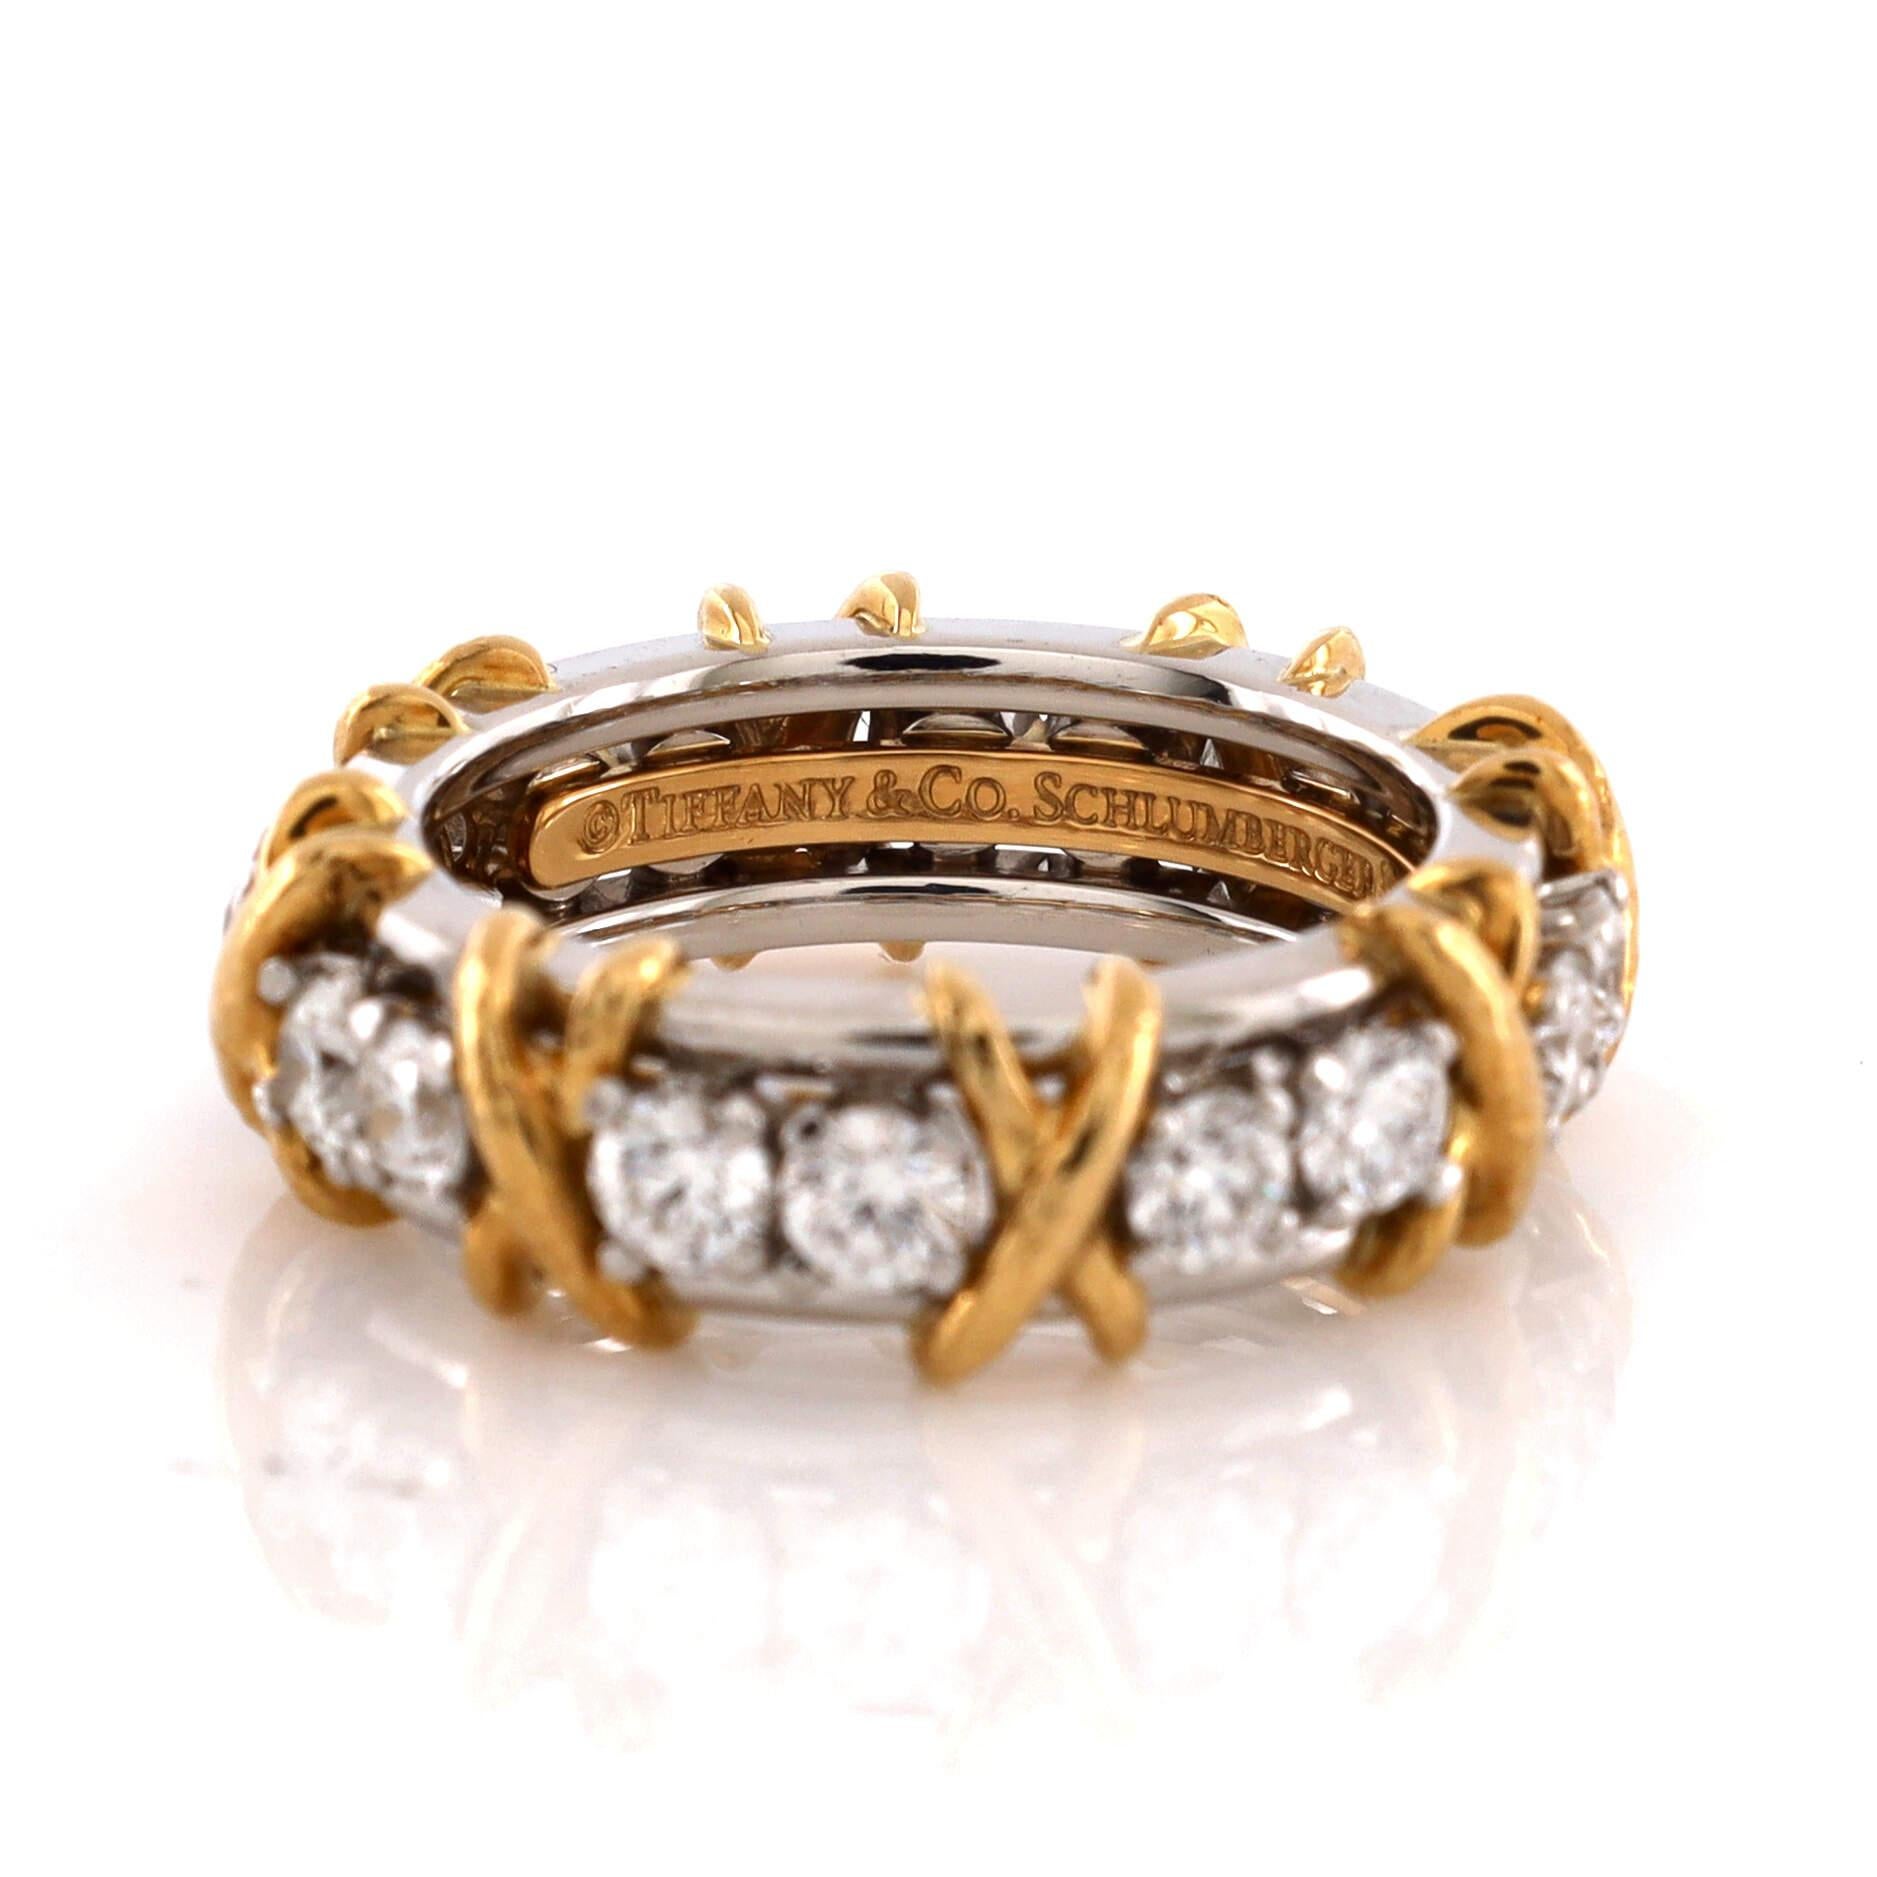 Women's or Men's Tiffany & Co. Schlumberger Sixteen Stone Ring 18k Yellow Gold and Platinum